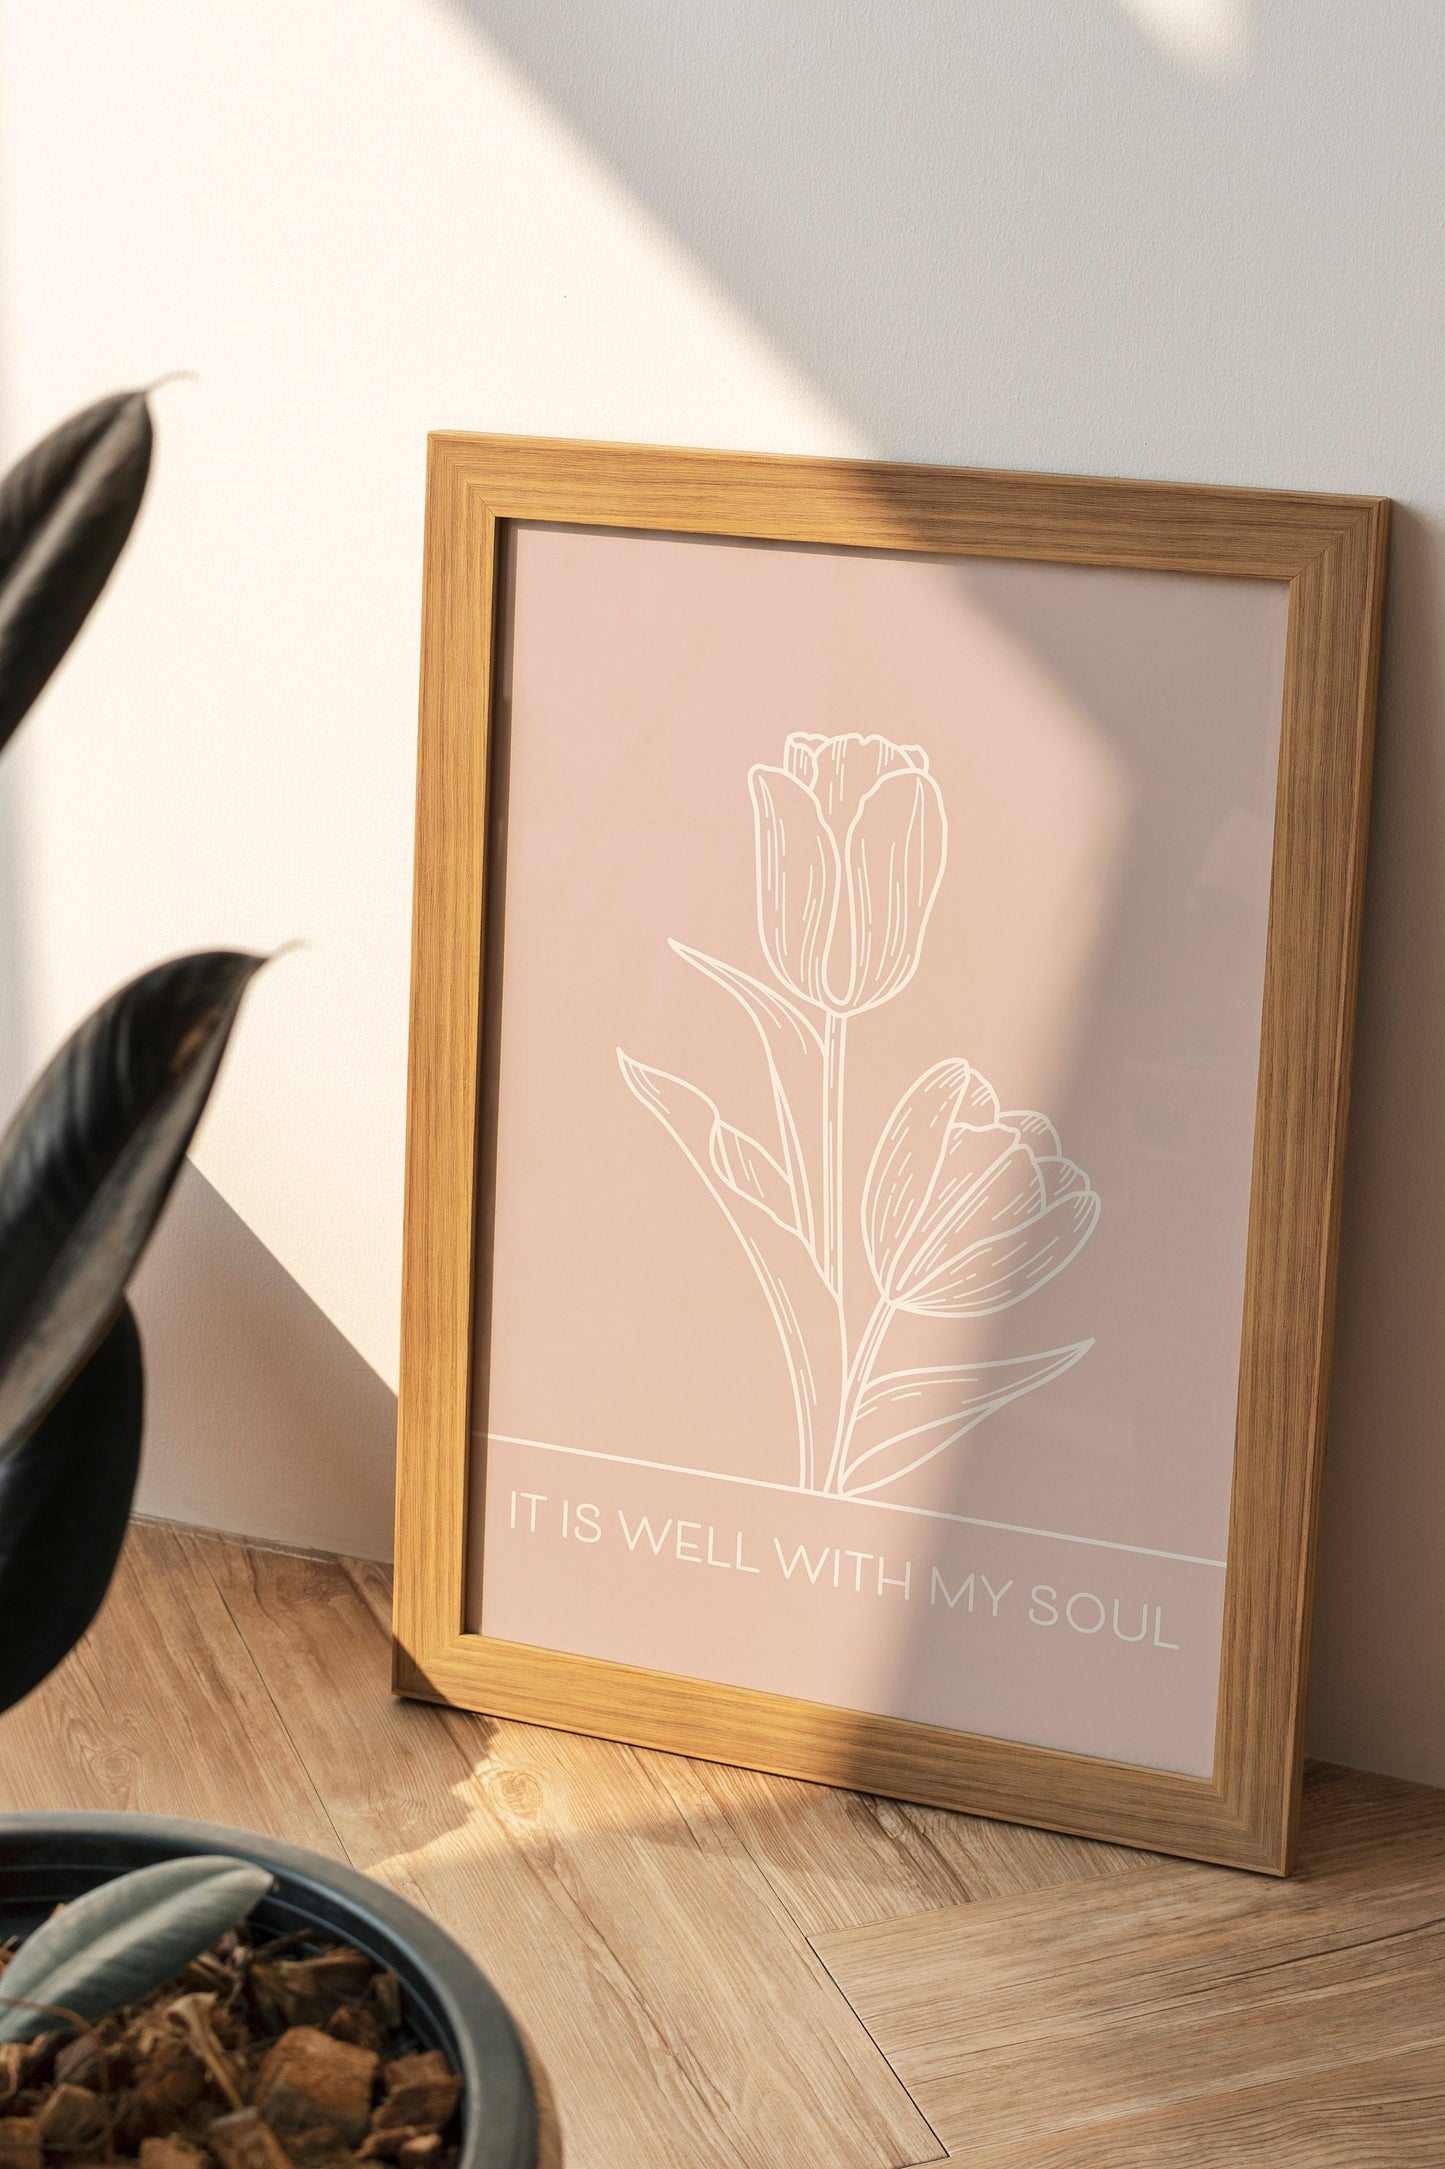 Tulips "It is Well with my Soul" Prints